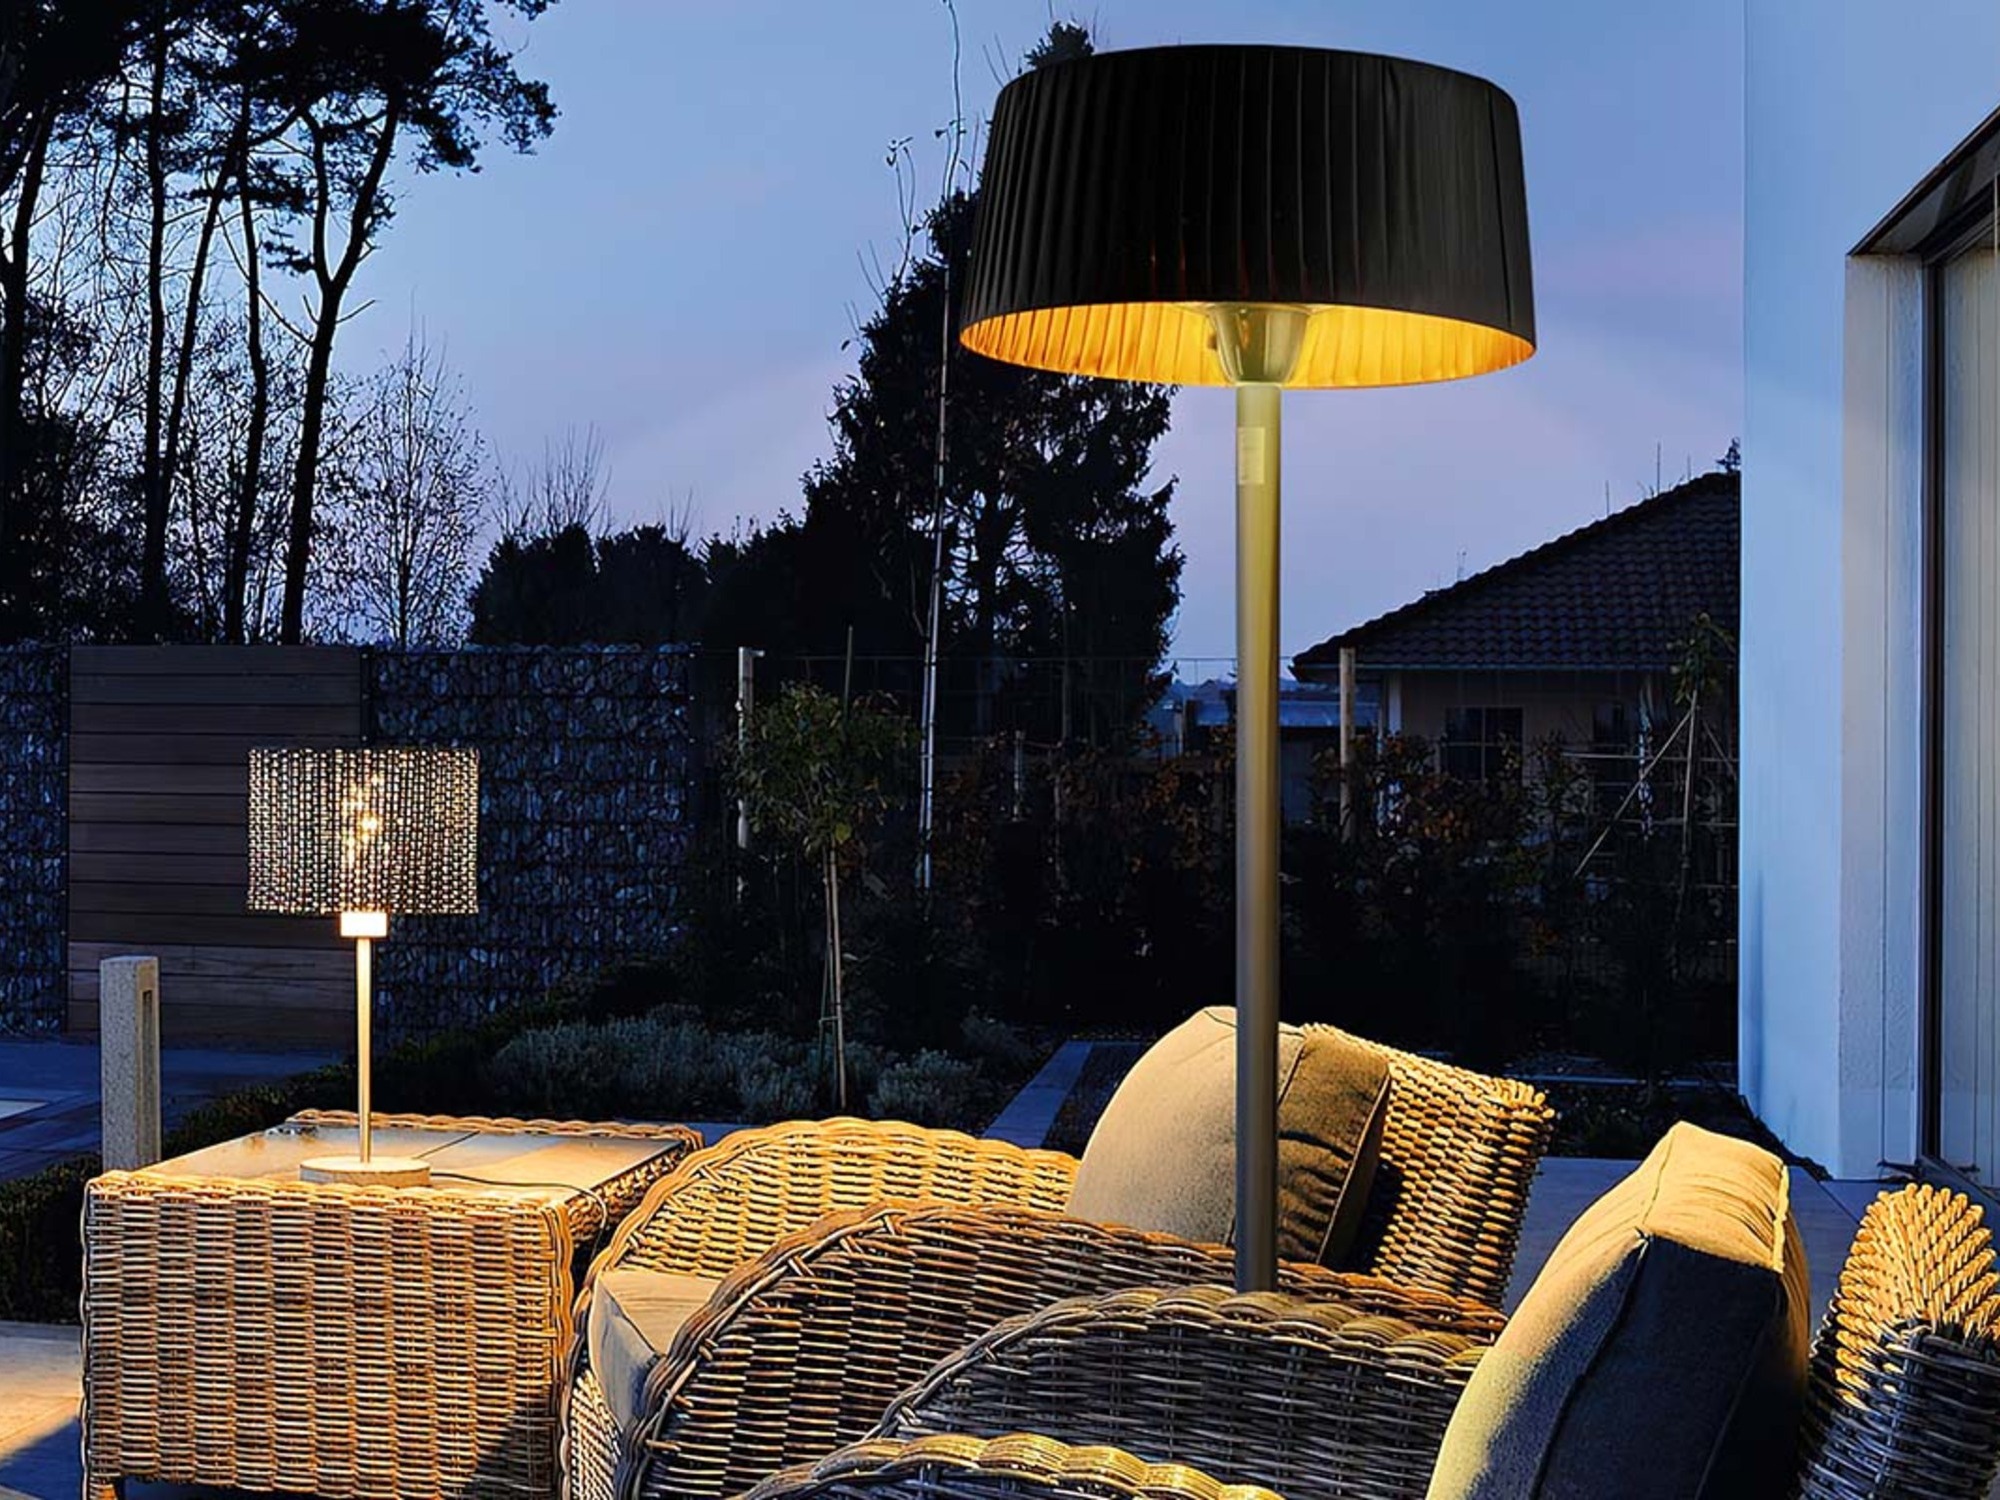 Make spending time outside more comfortable with this 2-in-1 lamp and heater